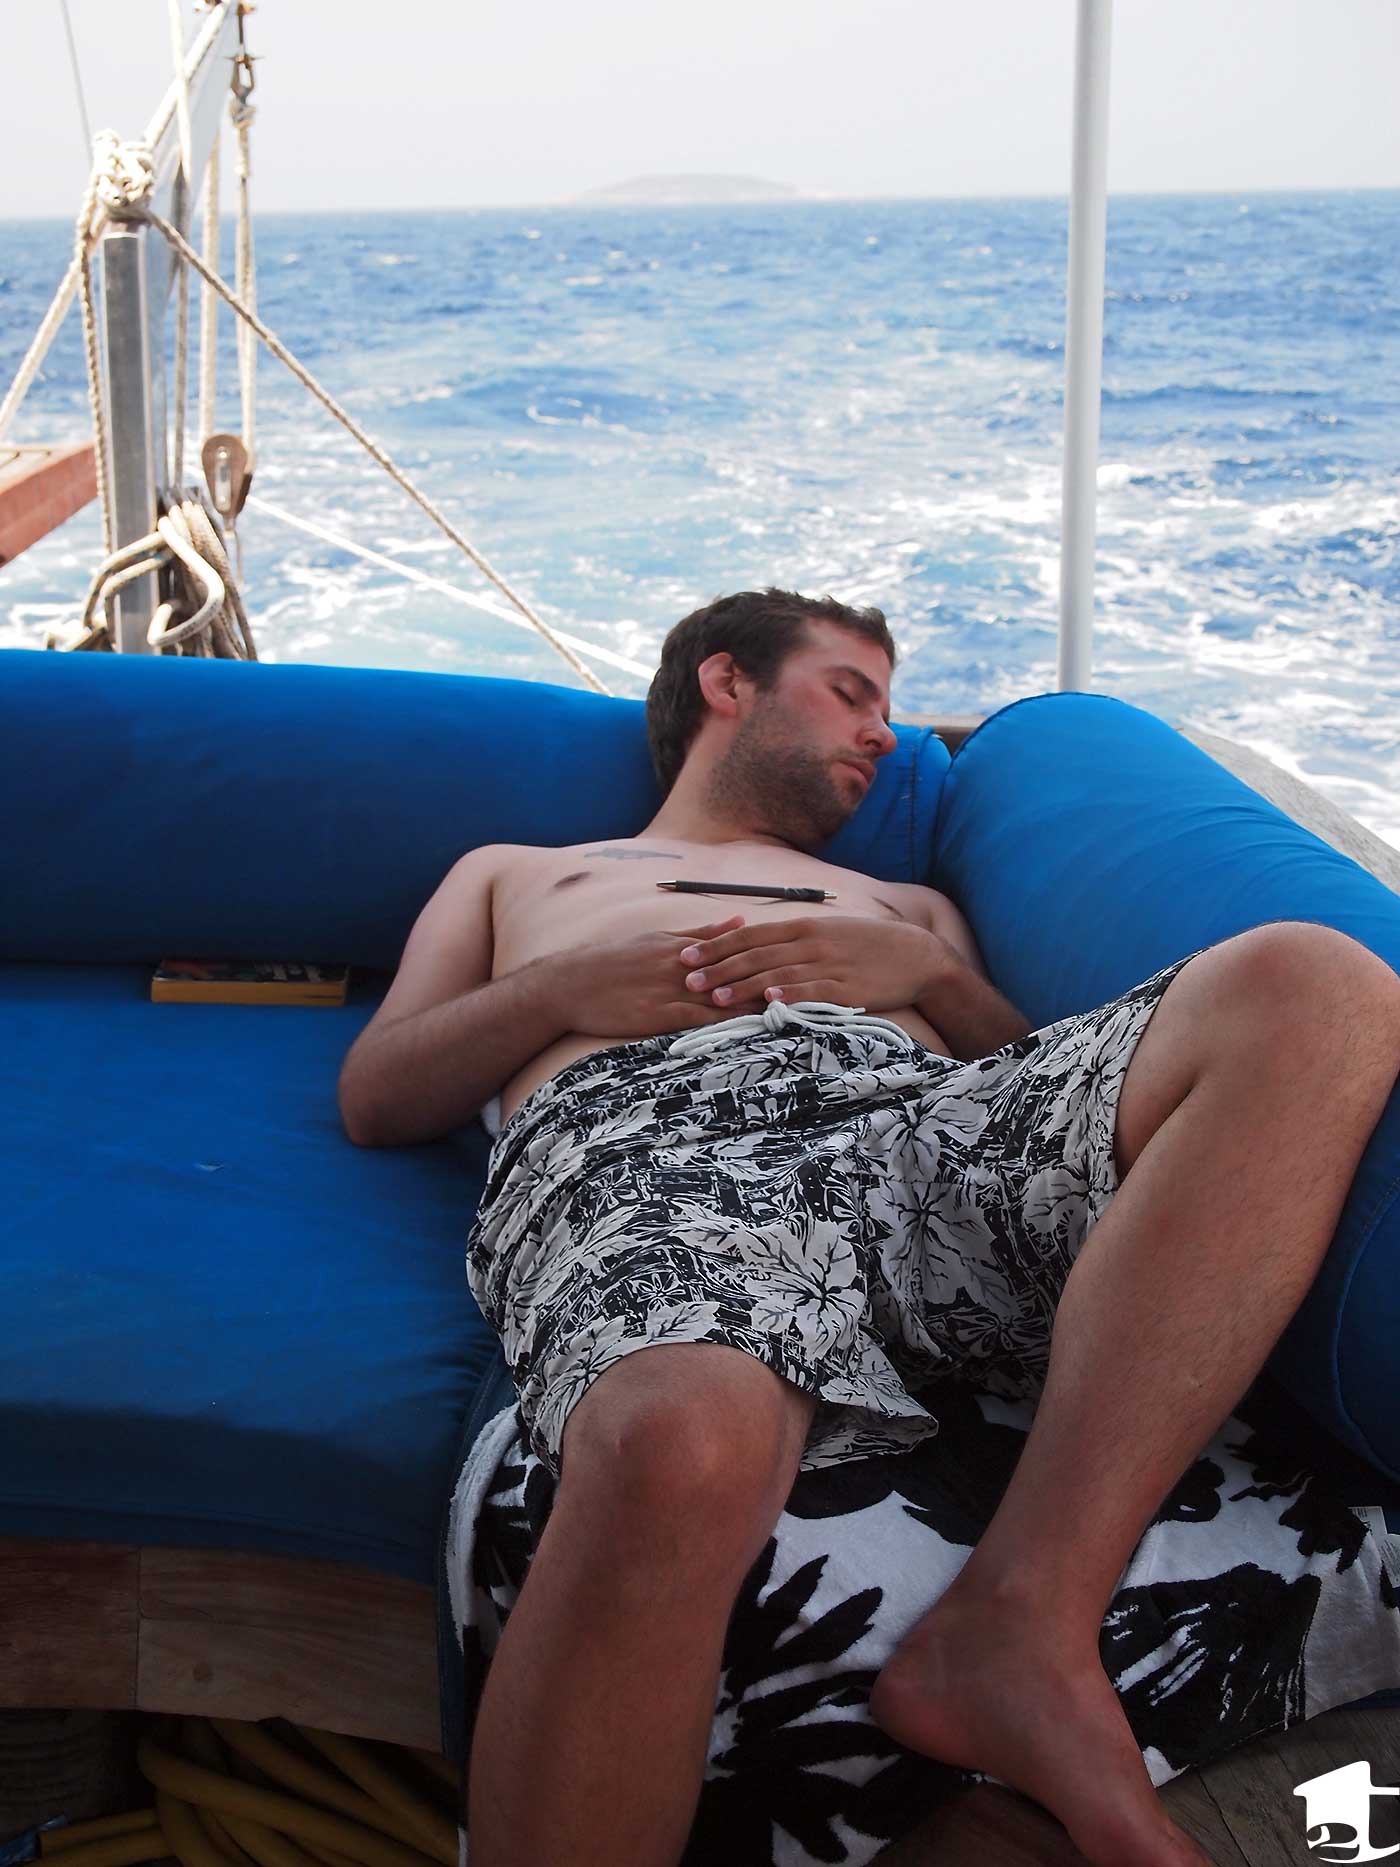 Mike Relaxing on a Boat in Turkey